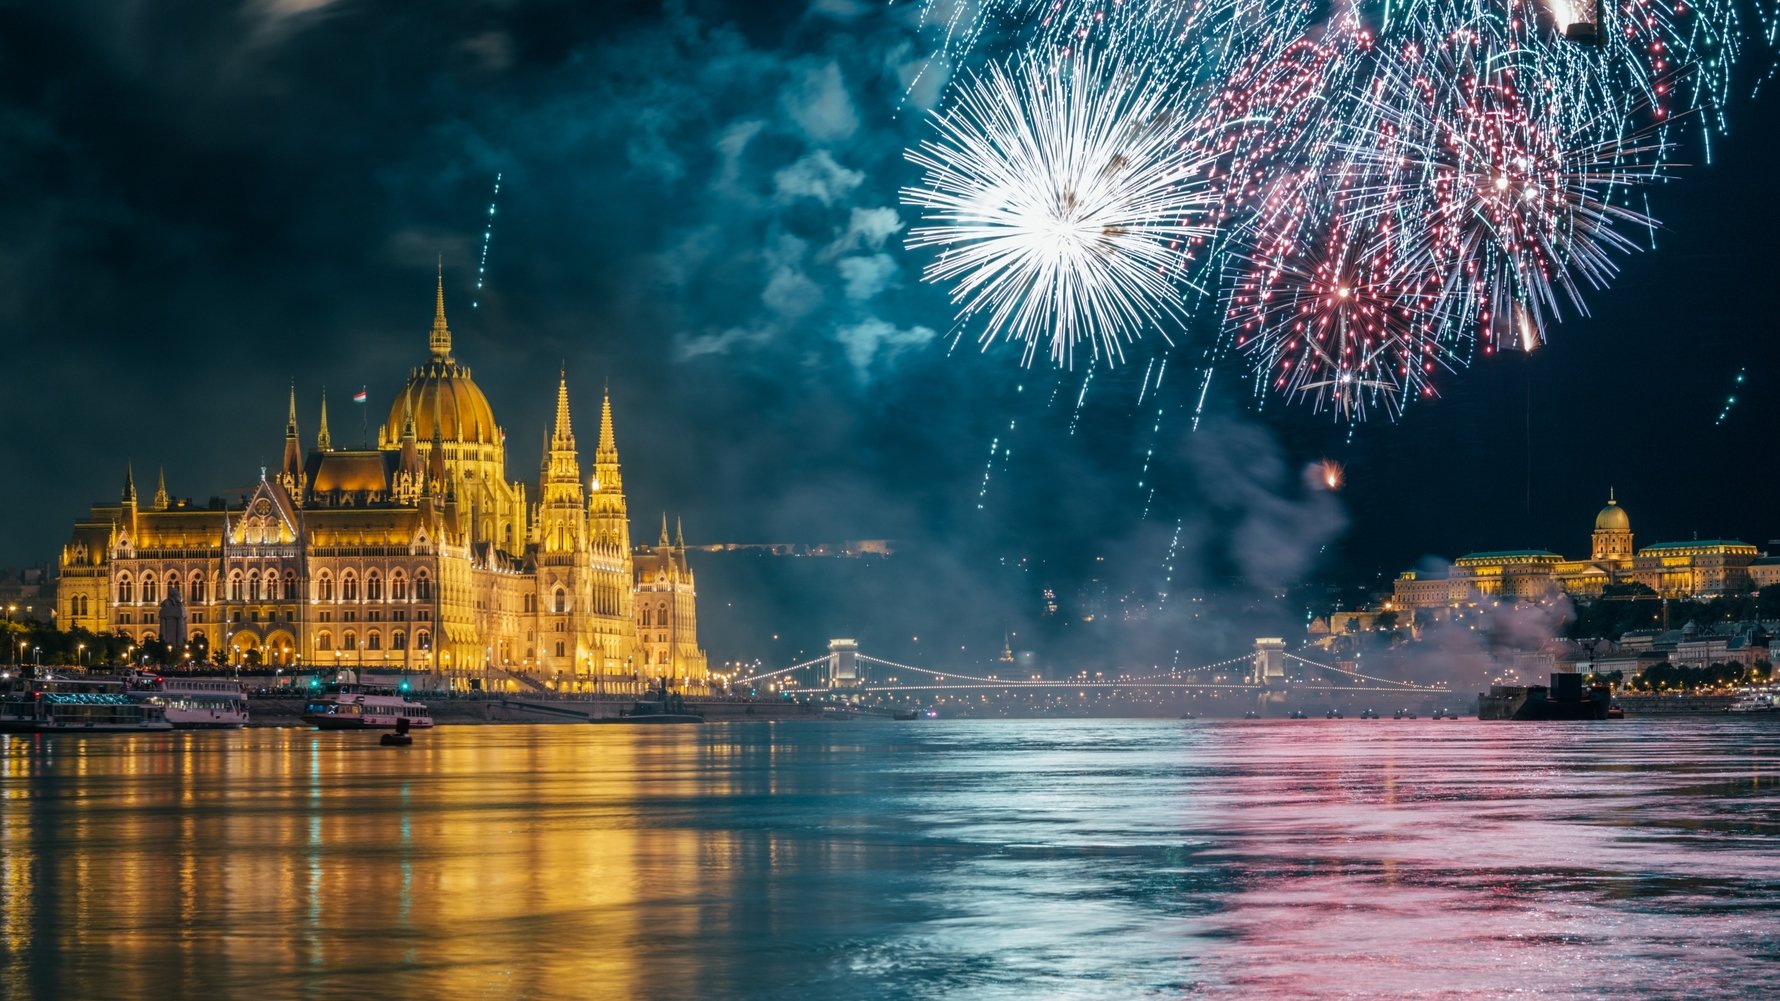 Budapest (Hungary) New Year's Eve Fireworks Live Streaming: Experience Danube River NYE Spectacular in Real Time!